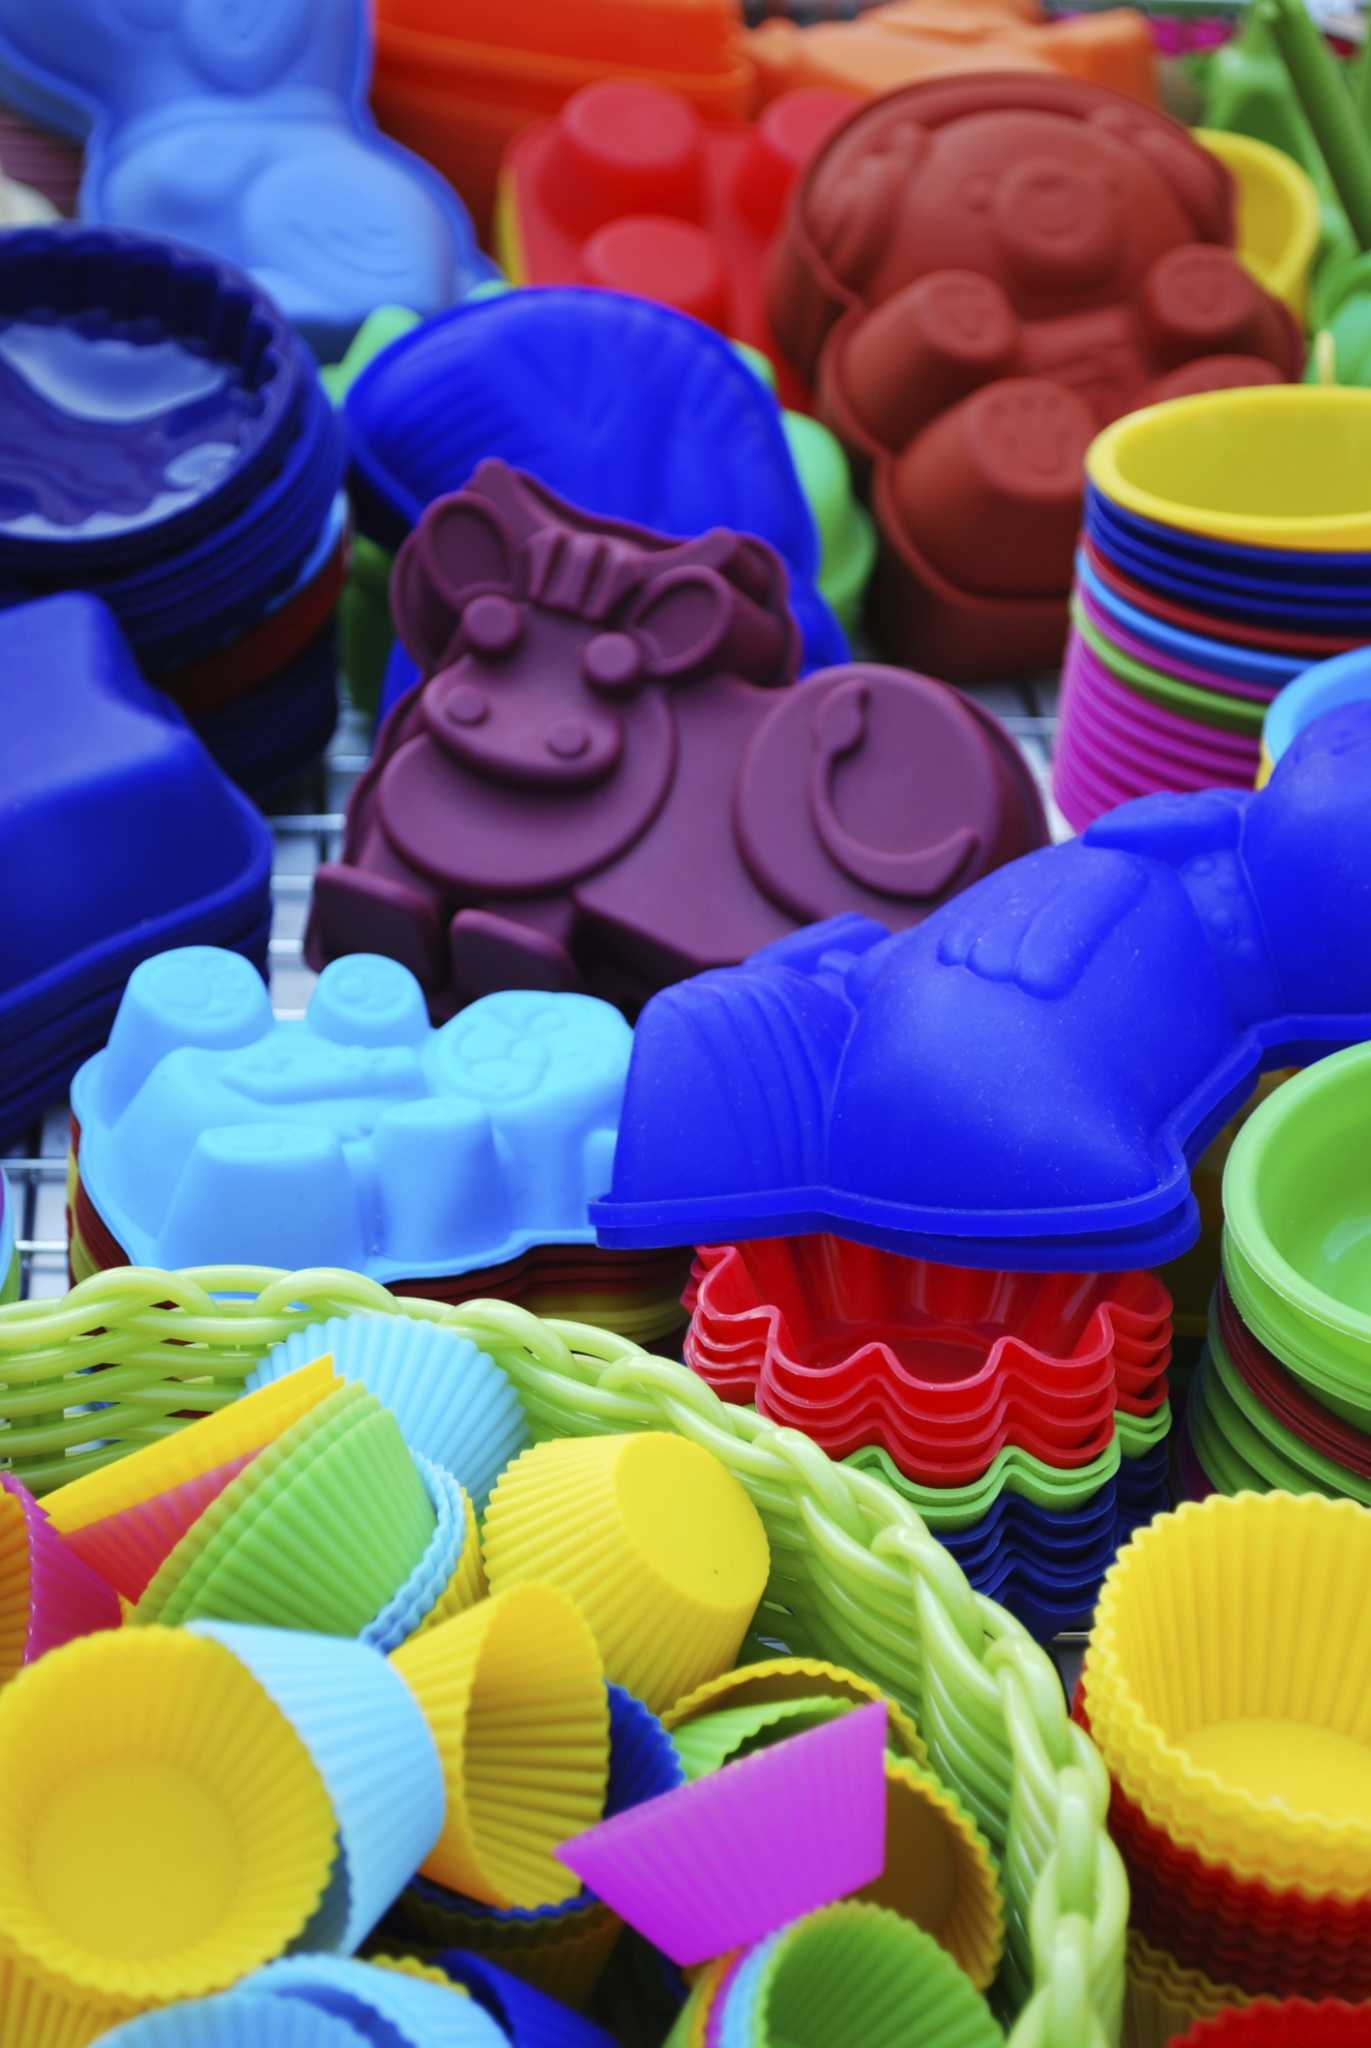 Silicone Bakeware at